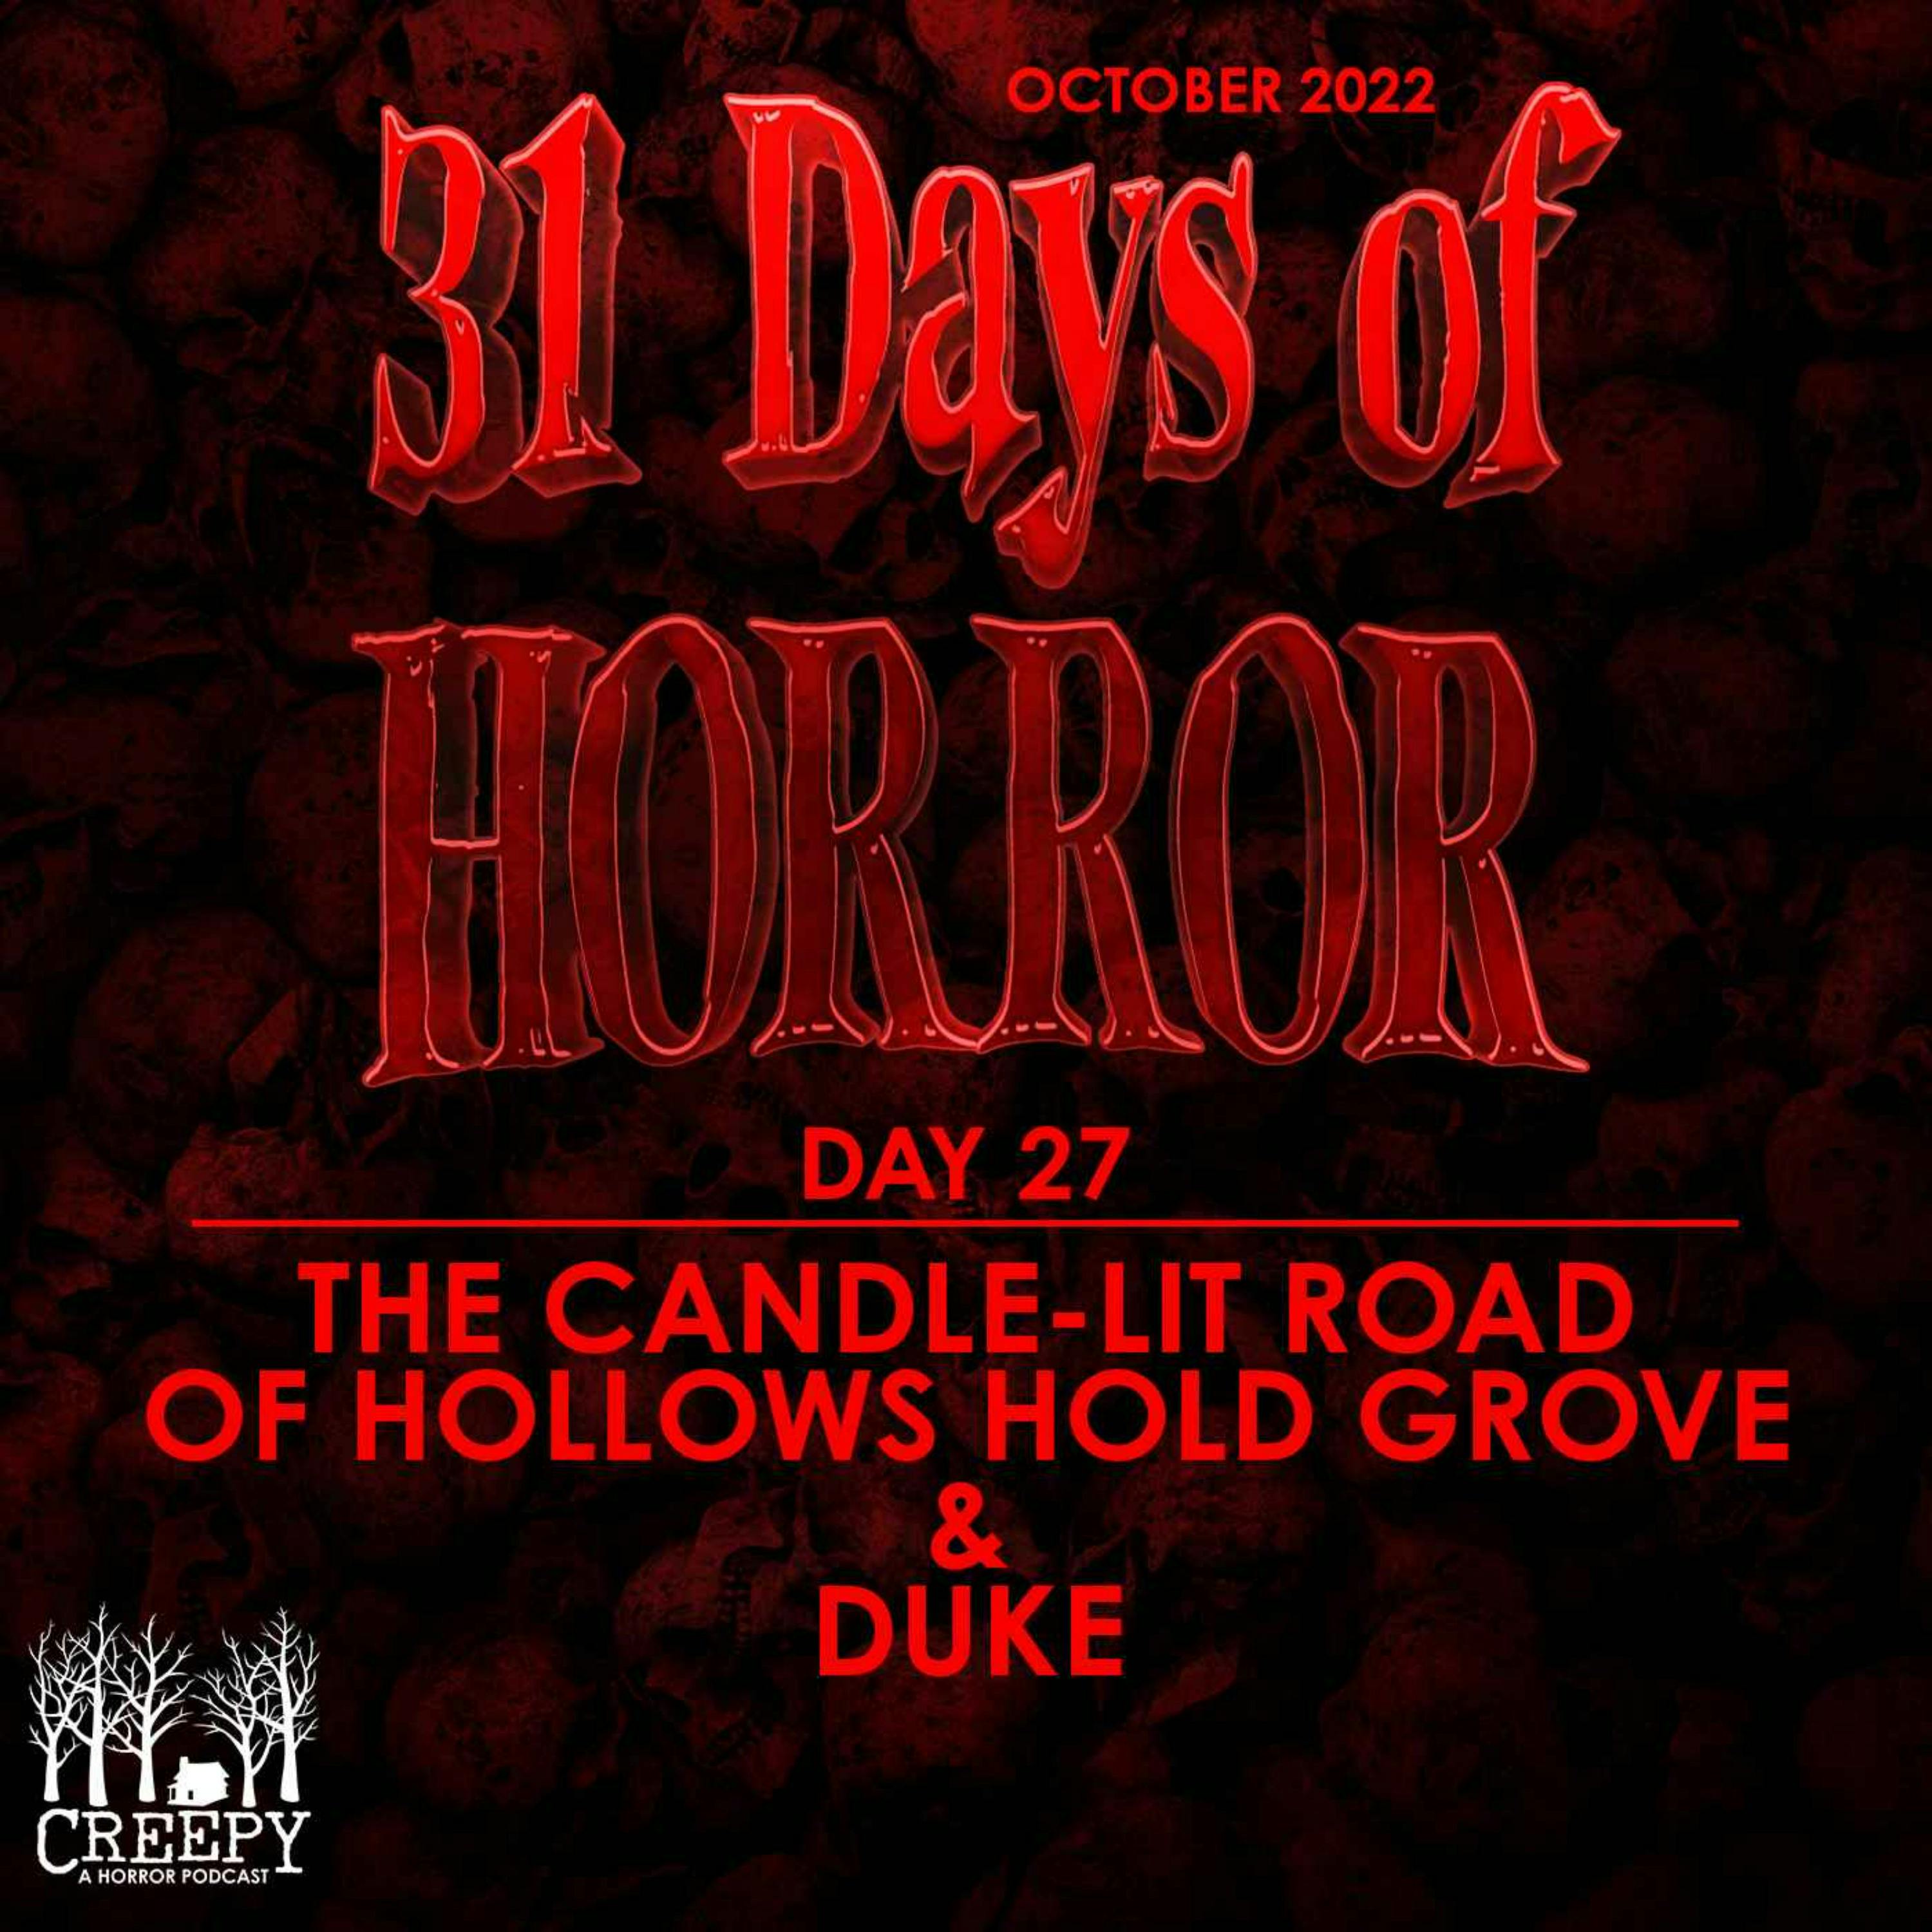 Day 27 - The Candle Lit Road of Hollows Hold Grove & Duke